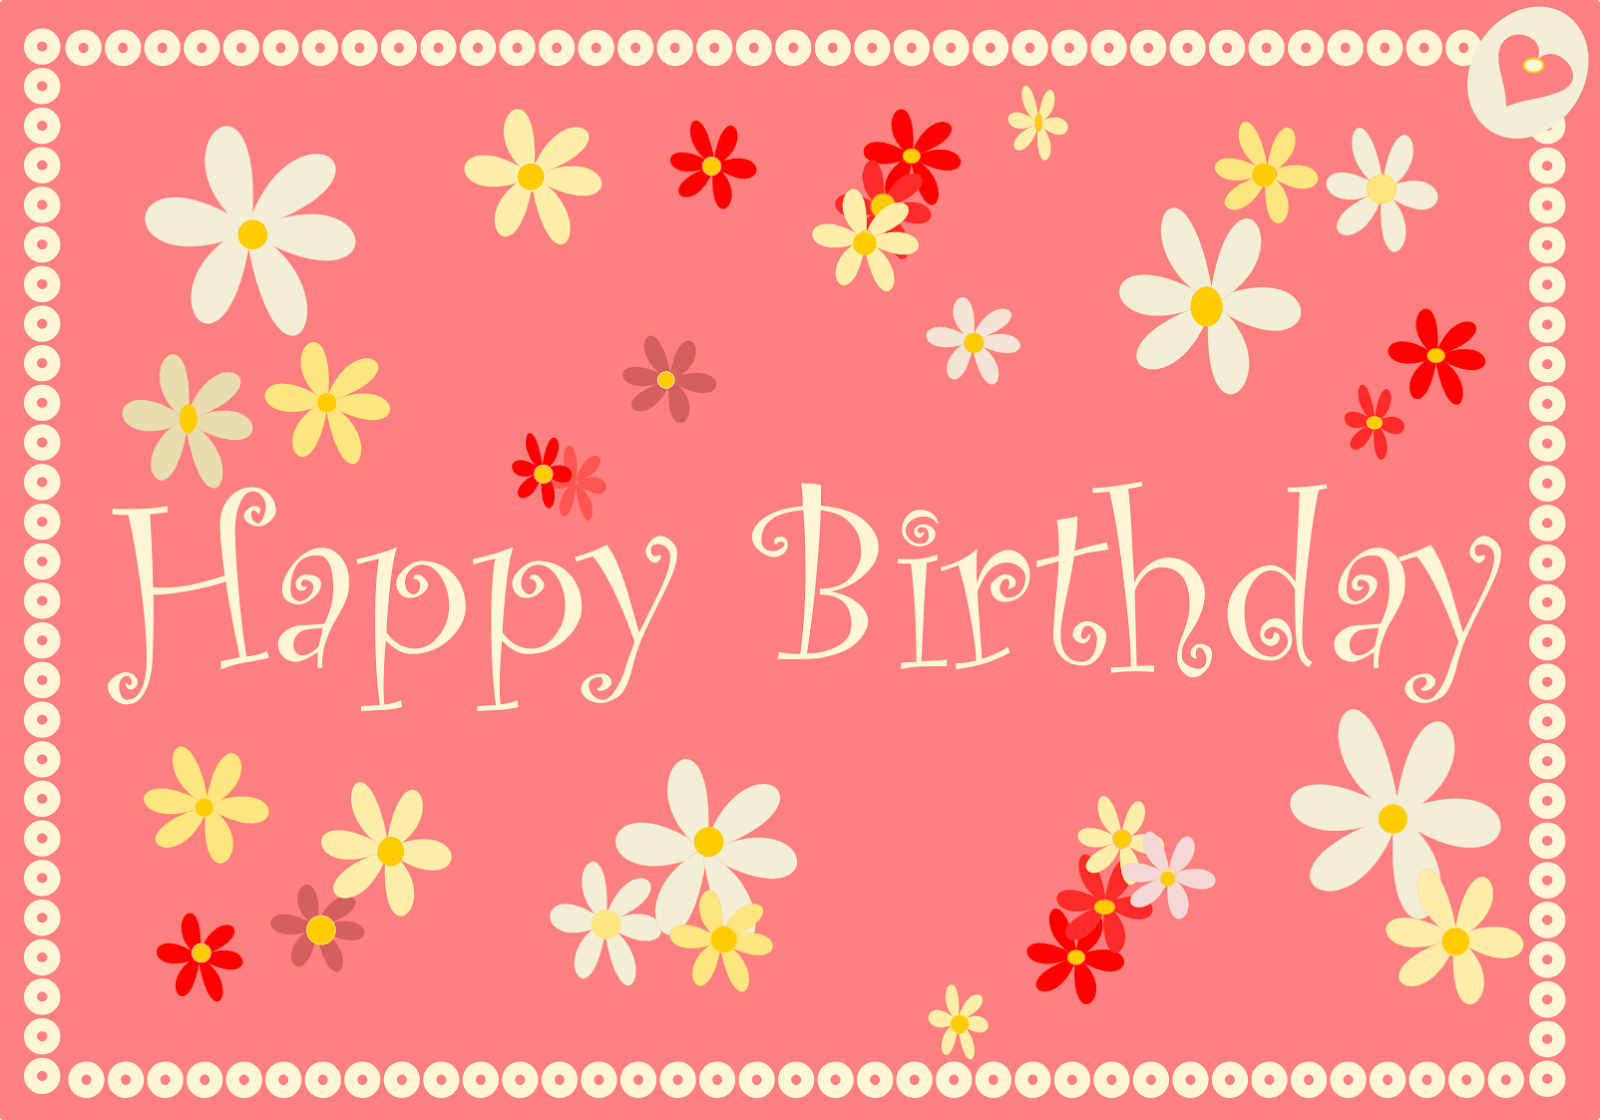 free download birthday cards images